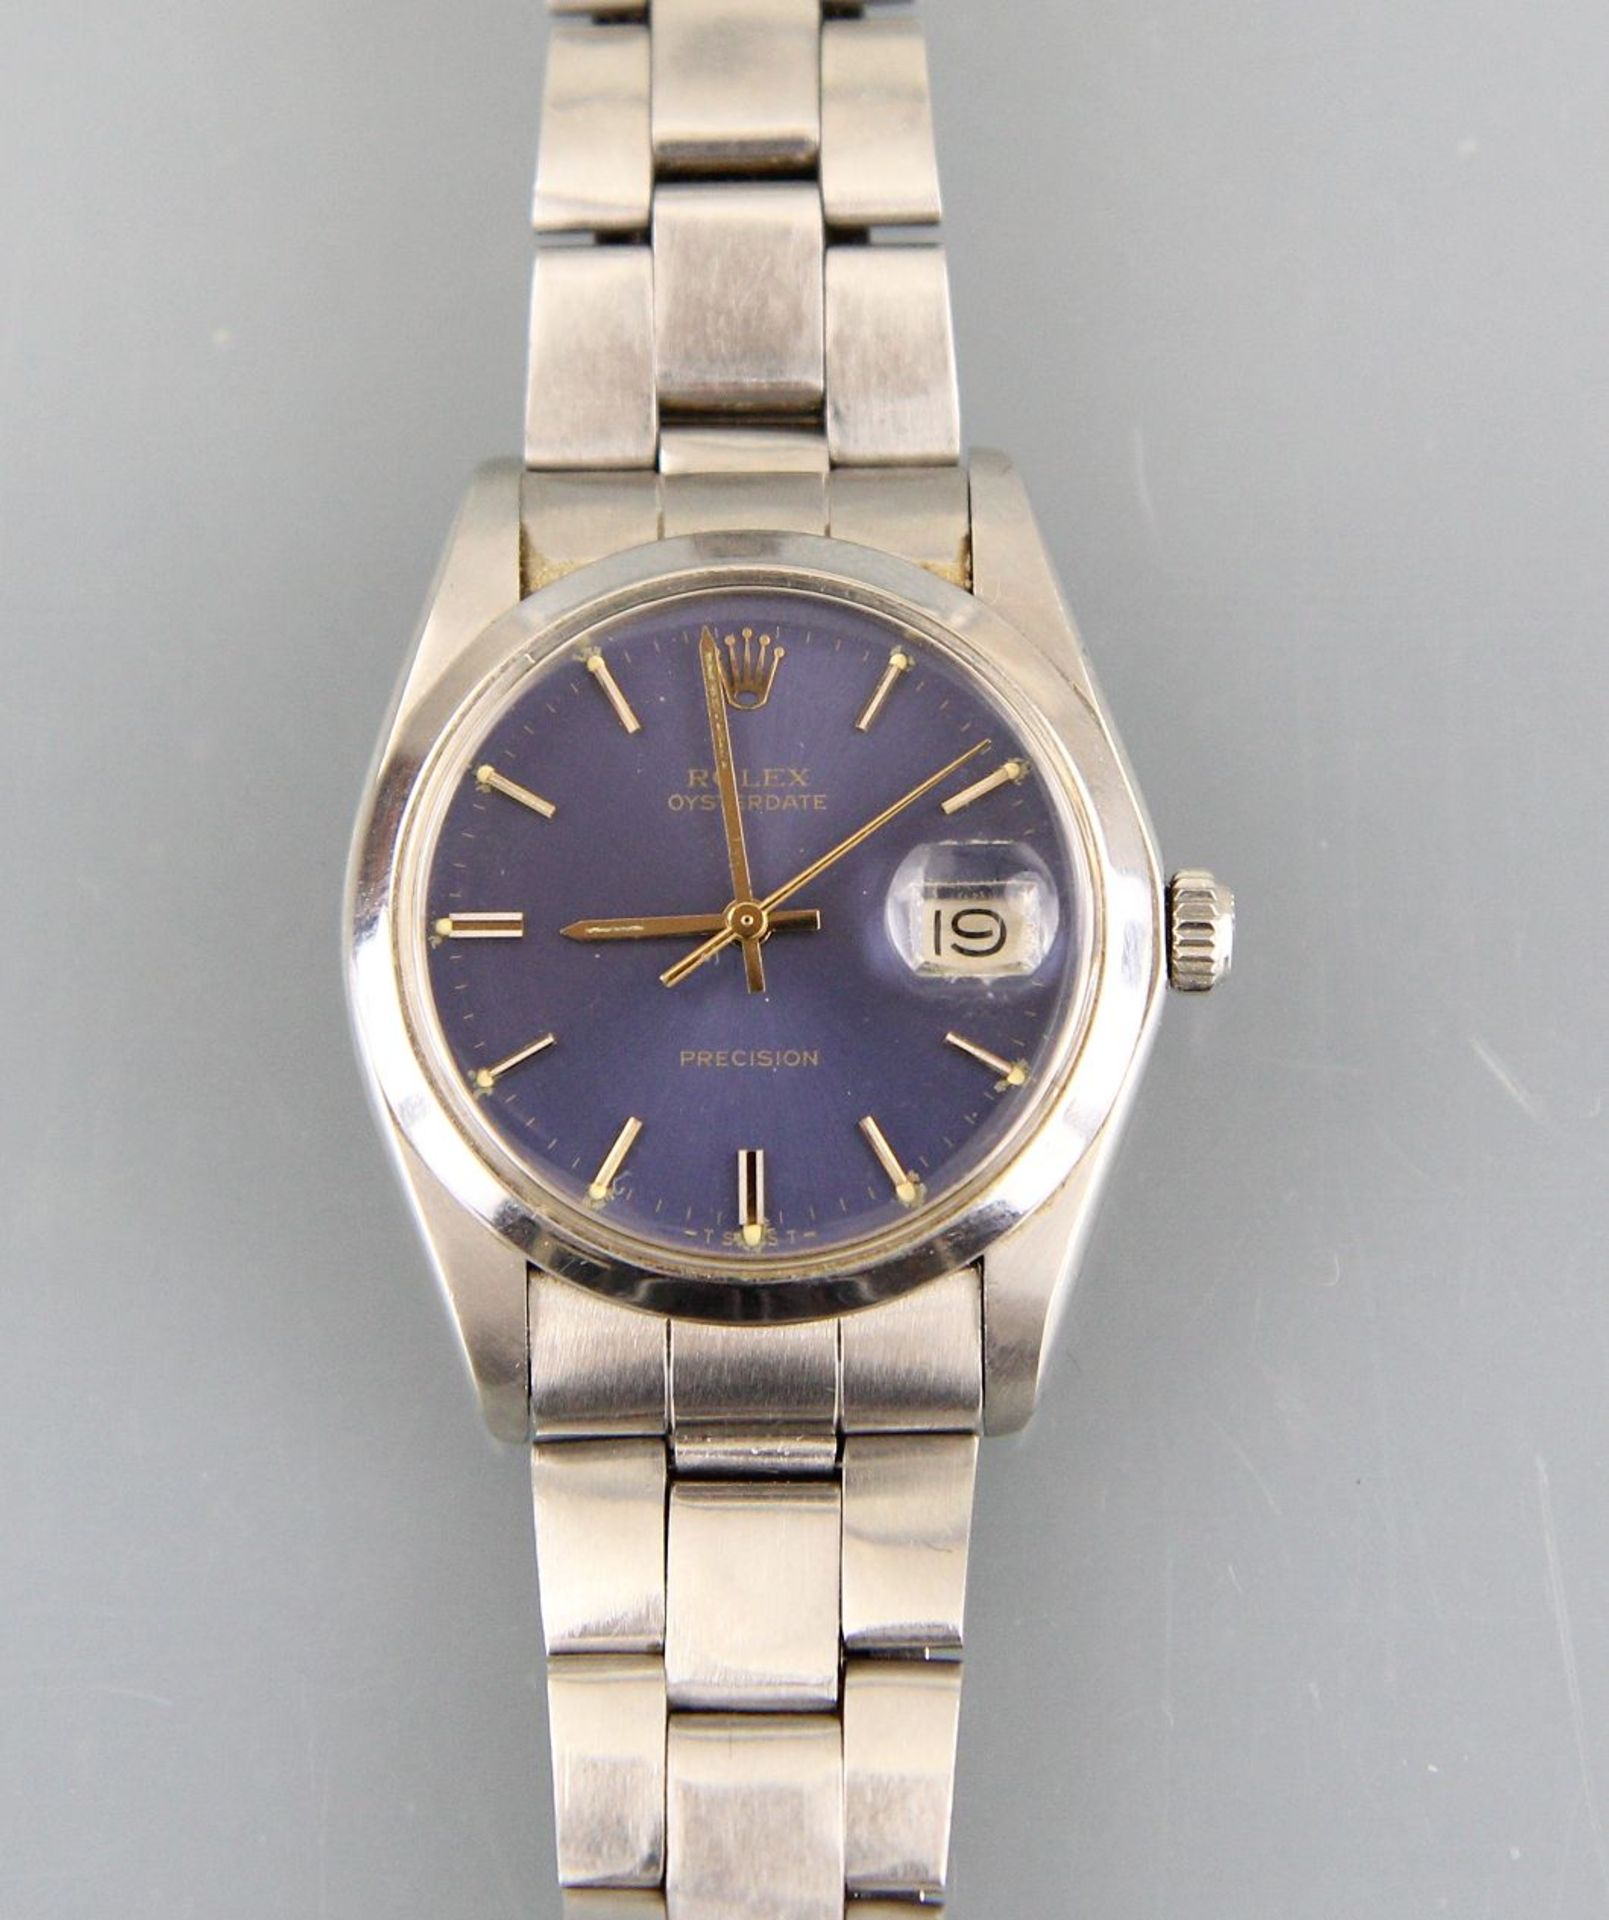 Wrist watch "Rolex Oysterdate Precision" Steel case and strap, movement reference 6694, blue dial